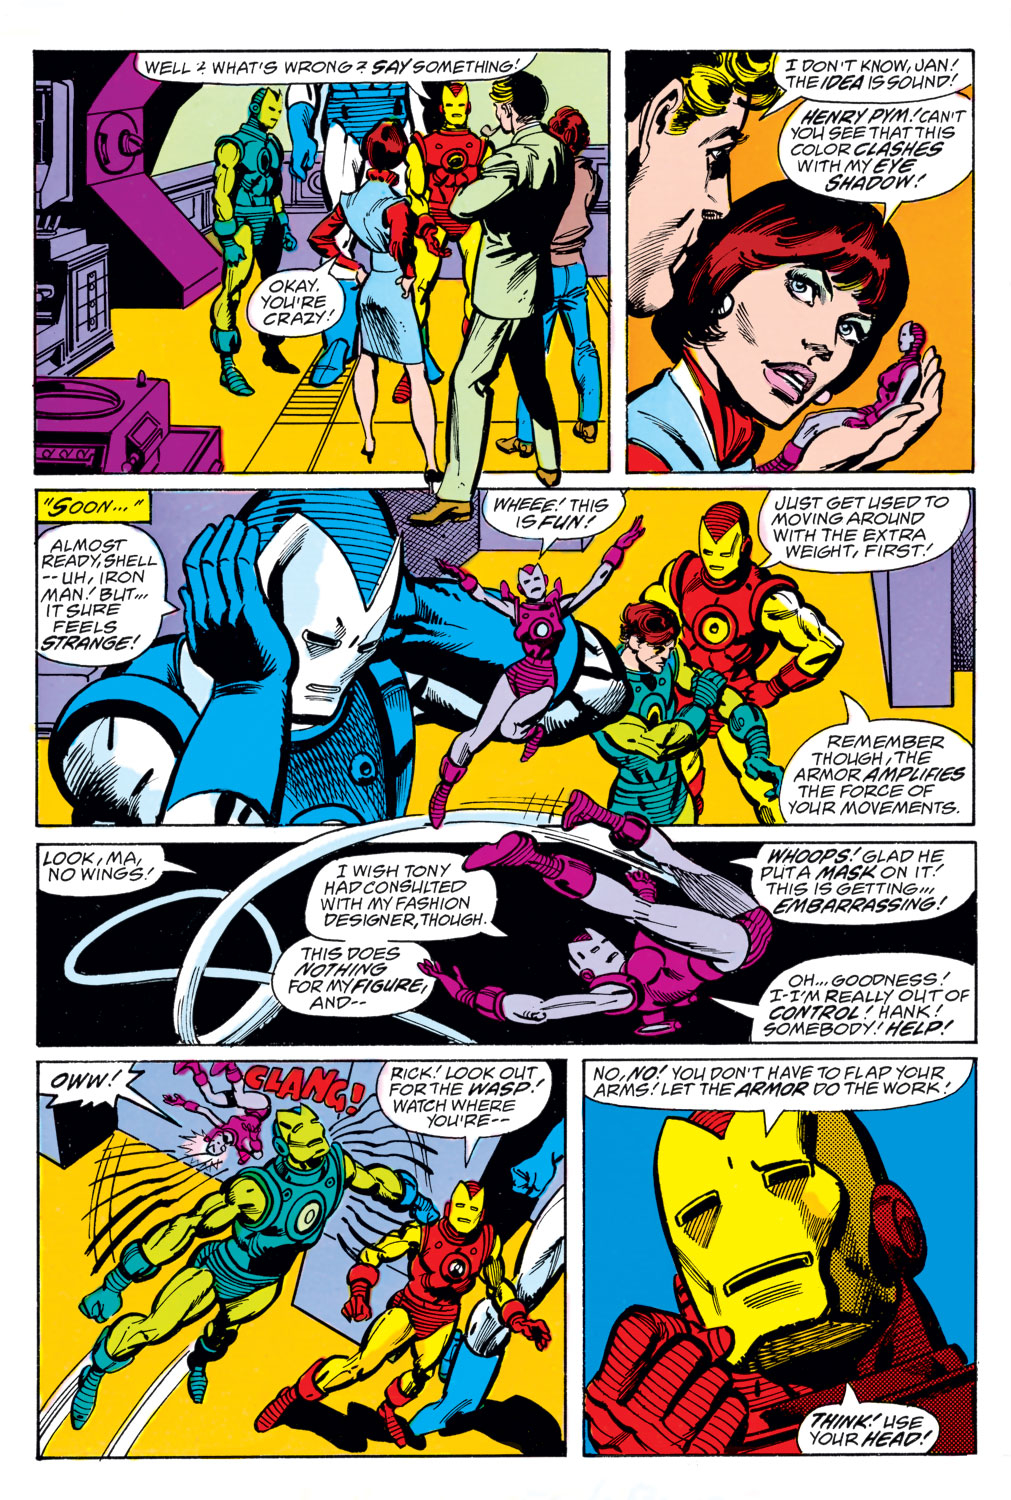 What If? (1977) issue 3 - The Avengers had never been - Page 12